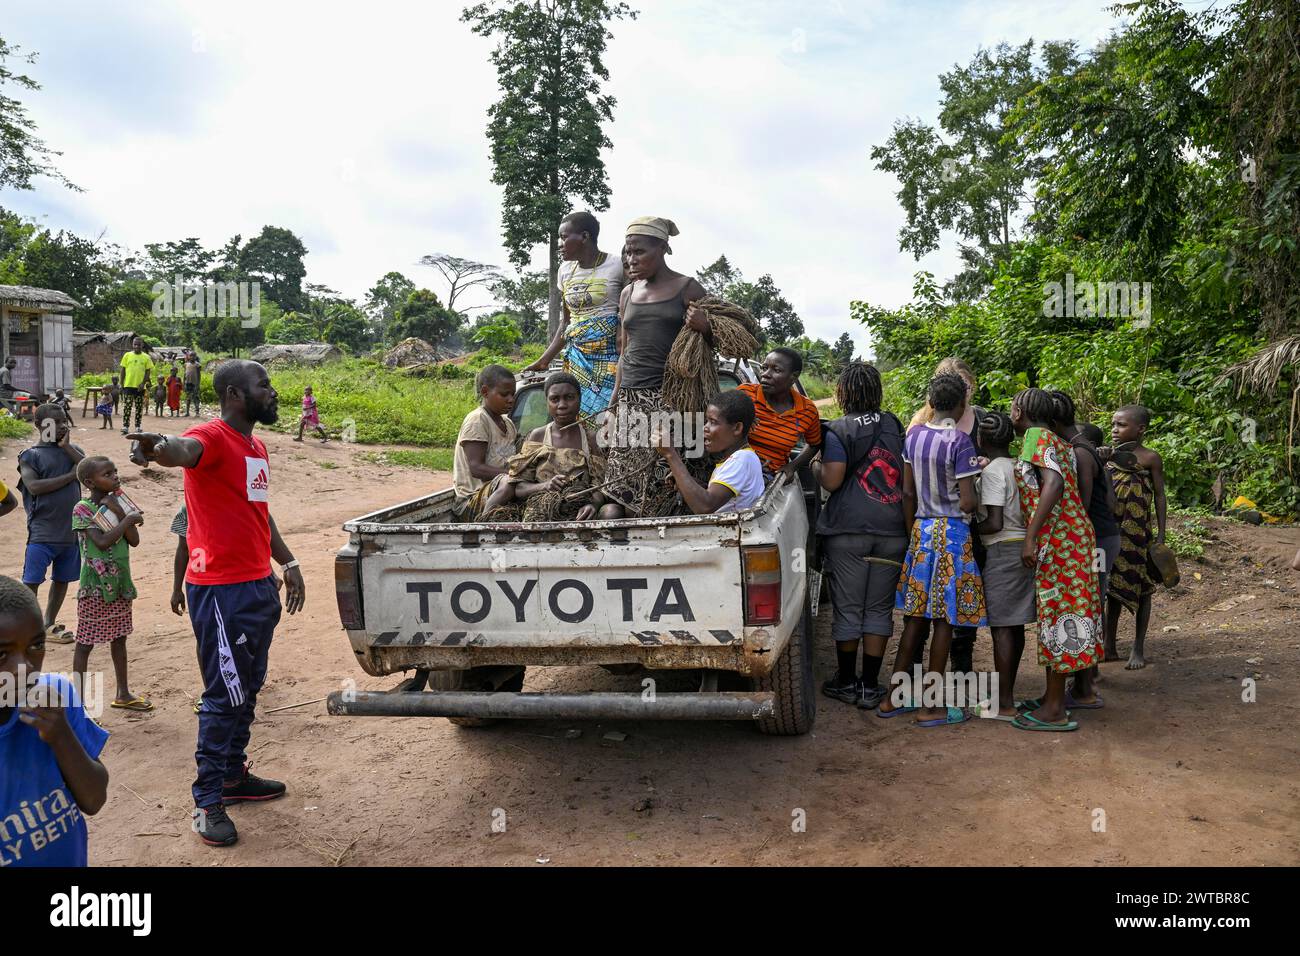 Pygmies of the Baka or BaAka people with their hunting nets on a pick-up truck, Bayanga, Sangha-Mbaere Prefecture, Central African Republic Stock Photo